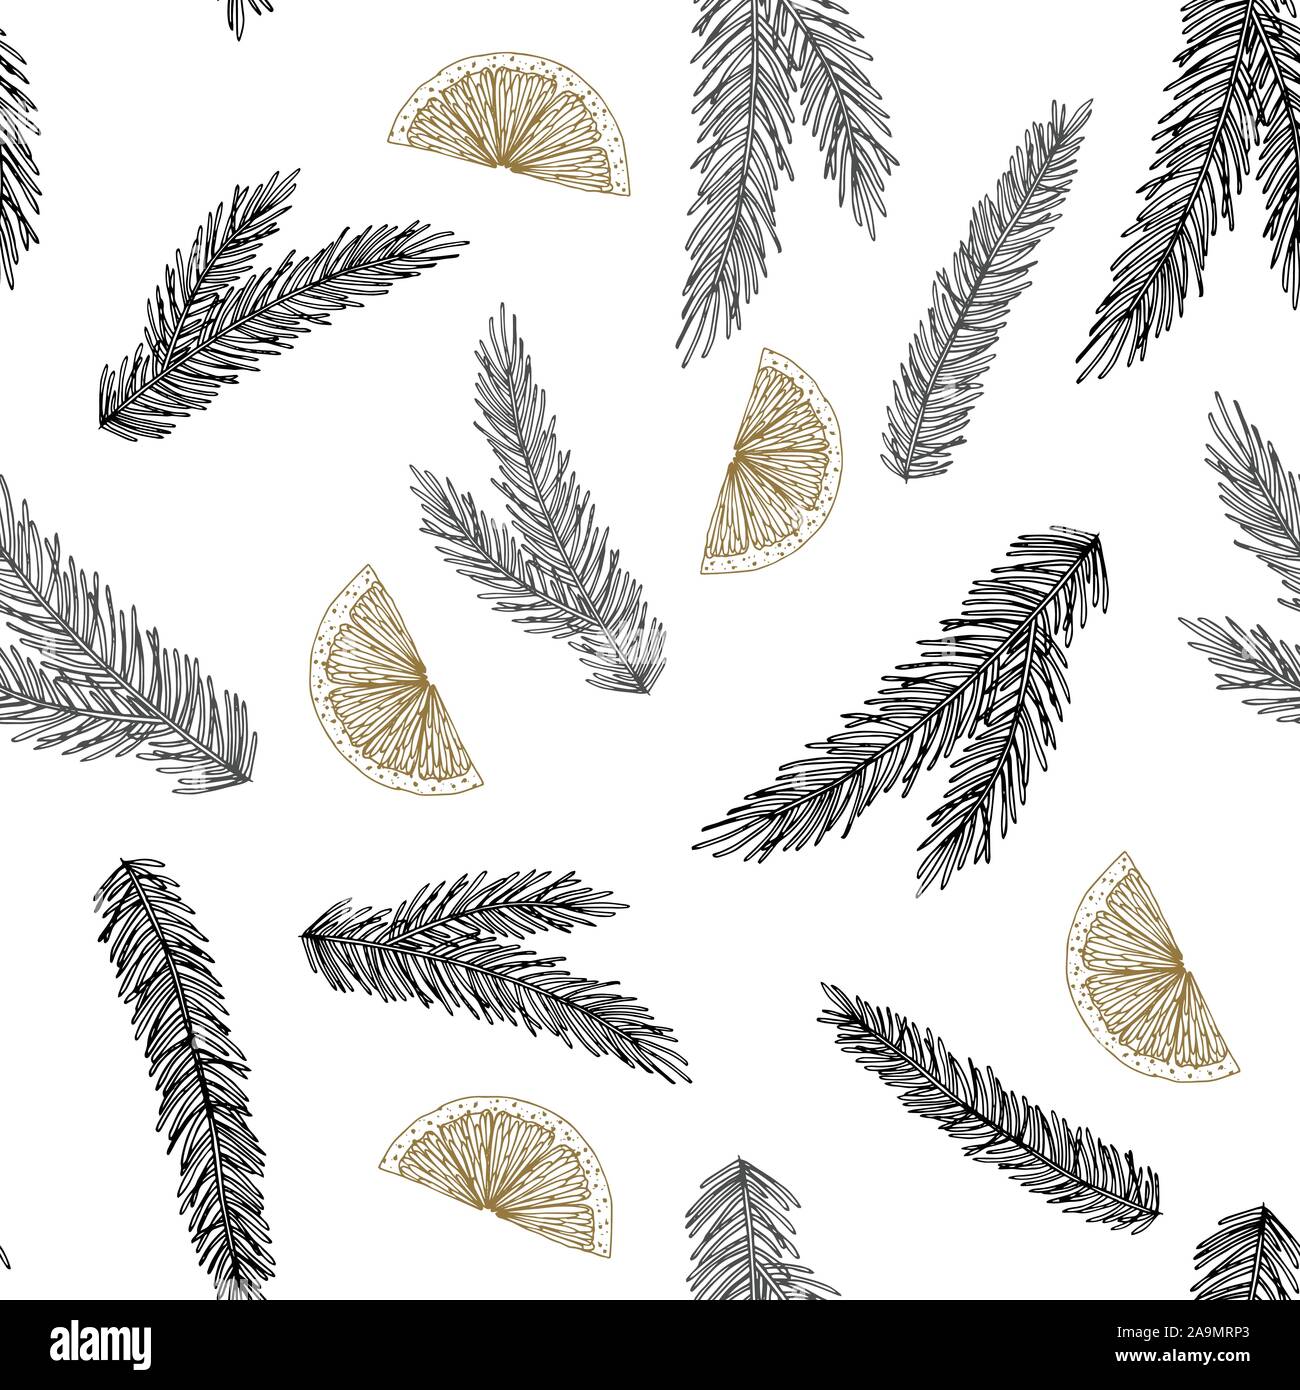 Xmas Seamless pattern with Christmas Tree Decorations, Pine Branches hand drawn art design vector illustration. Stock Vector